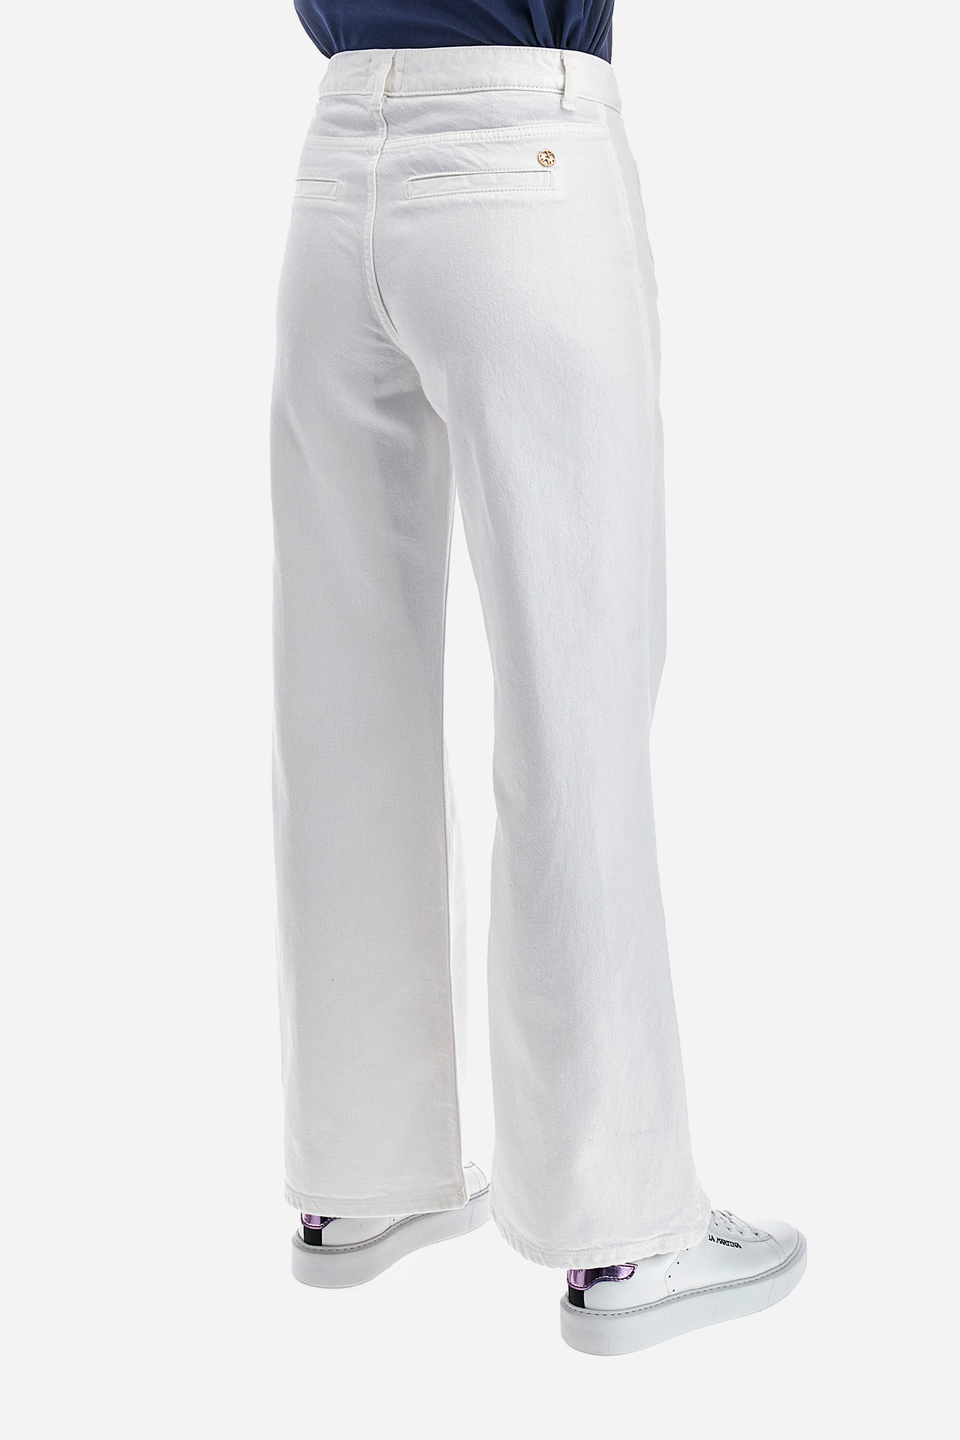 Buy White Grey Cotton Solid Cigarette Pants Online in India